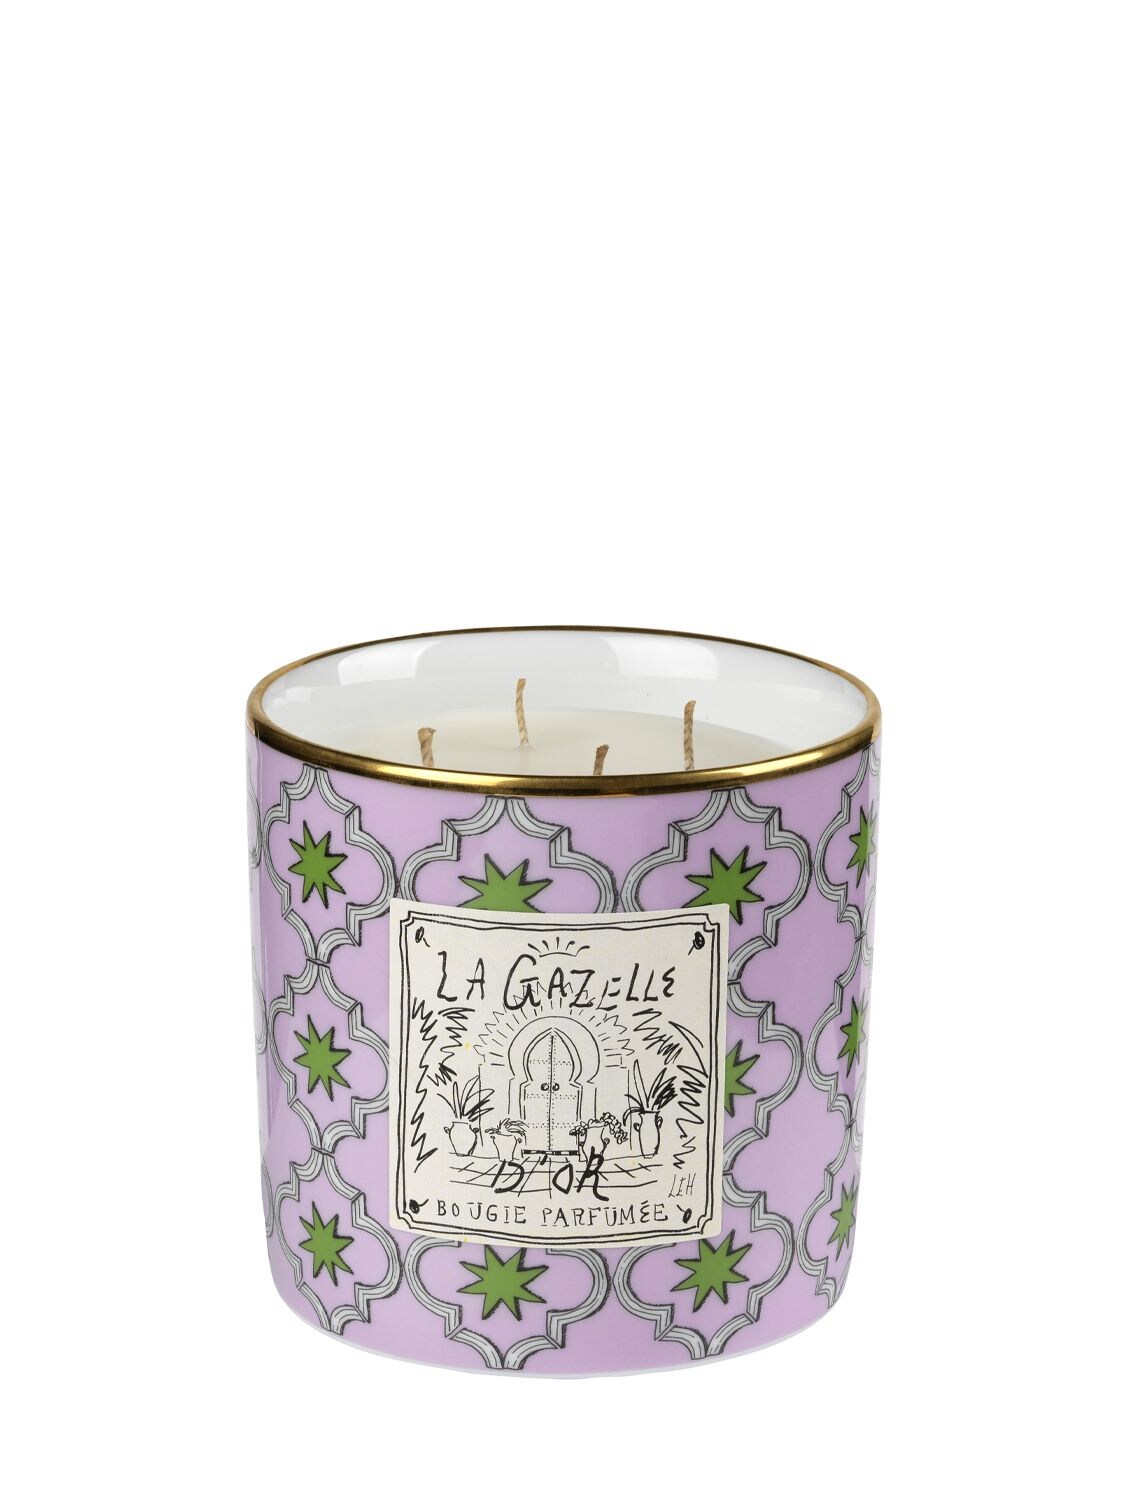 Ginori 1735 La Gazelle D'or Large Scented Candle In Purple